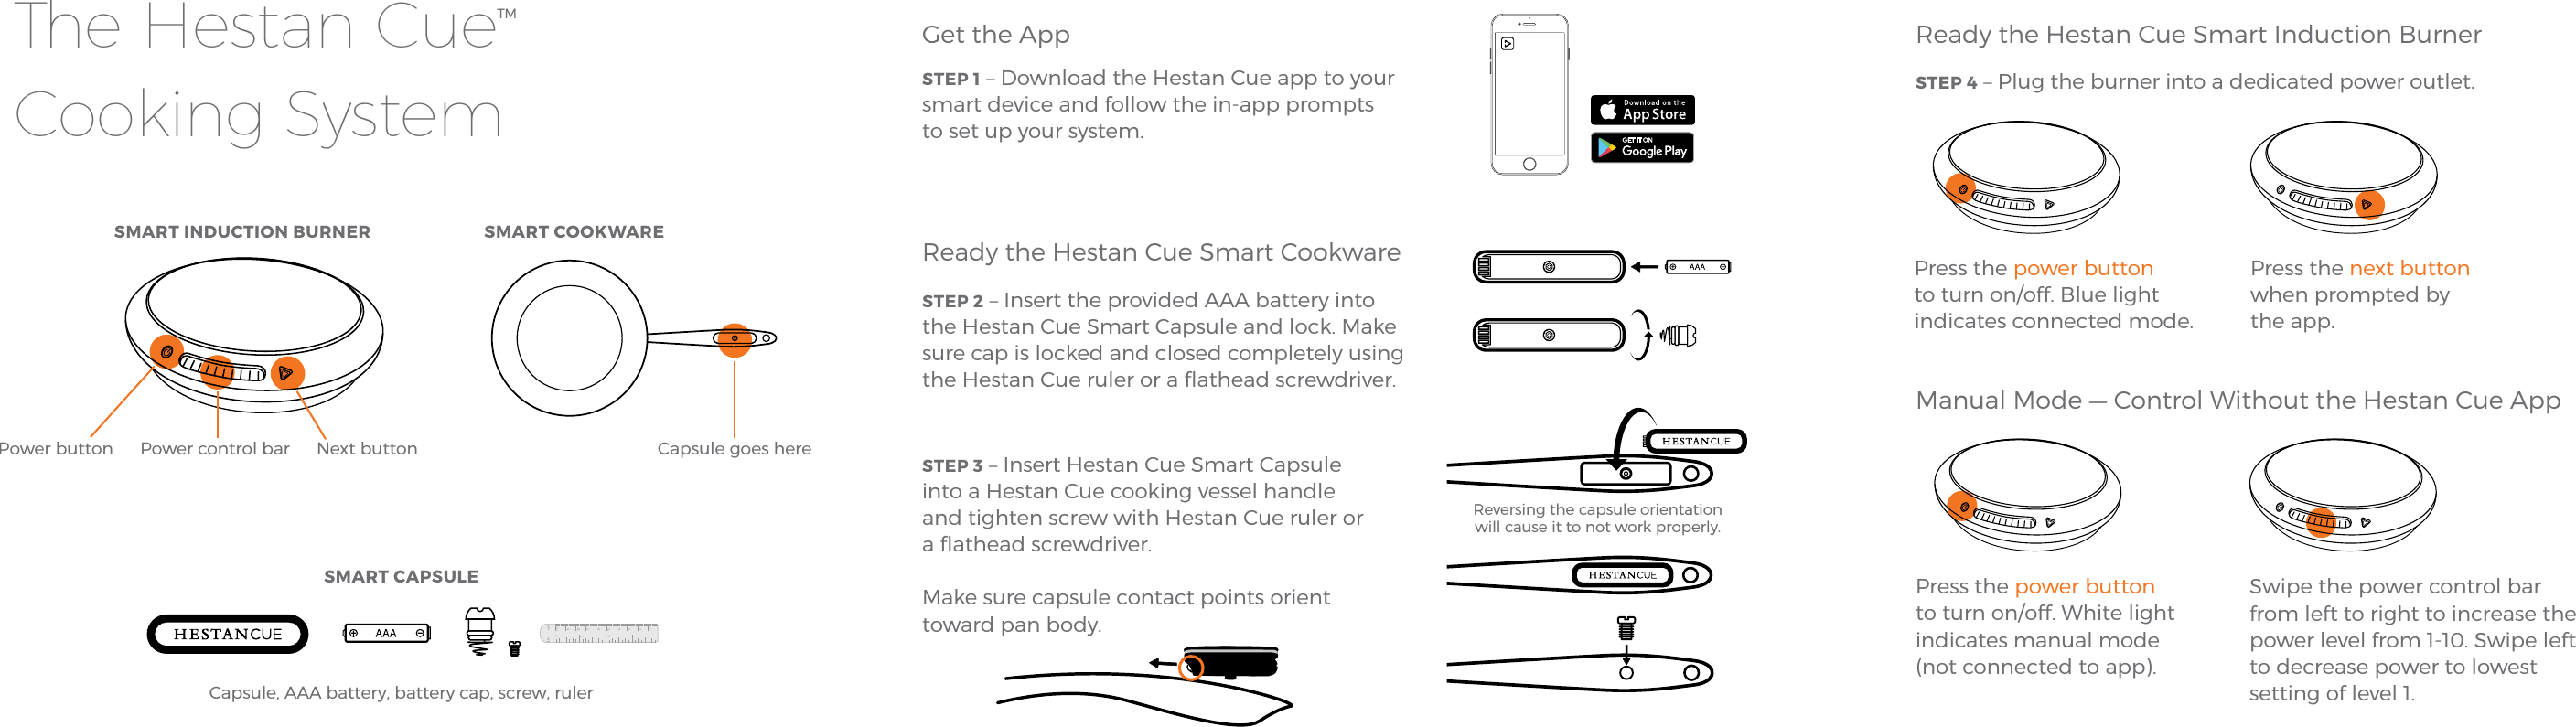 SMART INDUCTION BURNERGet the AppSTEP 1 – Download the Hestan Cue app to your smart device and follow the in-app prompts to set up your system.Ready the Hestan Cue Smart CookwareSTEP 2 – Insert the provided AAA battery into the Hestan Cue Smart Capsule and lock. Make sure cap is locked and closed completely using the Hestan Cue ruler or a ﬂathead screwdriver.STEP 3 – Insert Hestan Cue Smart Capsule into a Hestan Cue cooking vessel handle and tighten screw with Hestan Cue ruler or a ﬂathead screwdriver.Make sure capsule contact points orient toward pan body.Ready the Hestan Cue Smart Induction BurnerSTEP 4 – Plug the burner into a dedicated power outlet.Manual Mode — Control Without the Hestan Cue AppSMART COOKWAREThe Hestan CueTM Cooking SystemPower control barPower button Next button Capsule goes hereSMART CAPSULECapsule, AAA battery, battery cap, screw, rulerPress the power button to turn on/off. Blue light indicates connected mode. Press the next button when prompted by the app.Press the power button to turn on/off. White light indicates manual mode  (not connected to app).Swipe the power control bar from left to right to increase the power level from 1-10. Swipe left to decrease power to lowest setting of level 1. Reversing the capsule orientation will cause it to not work properly. 